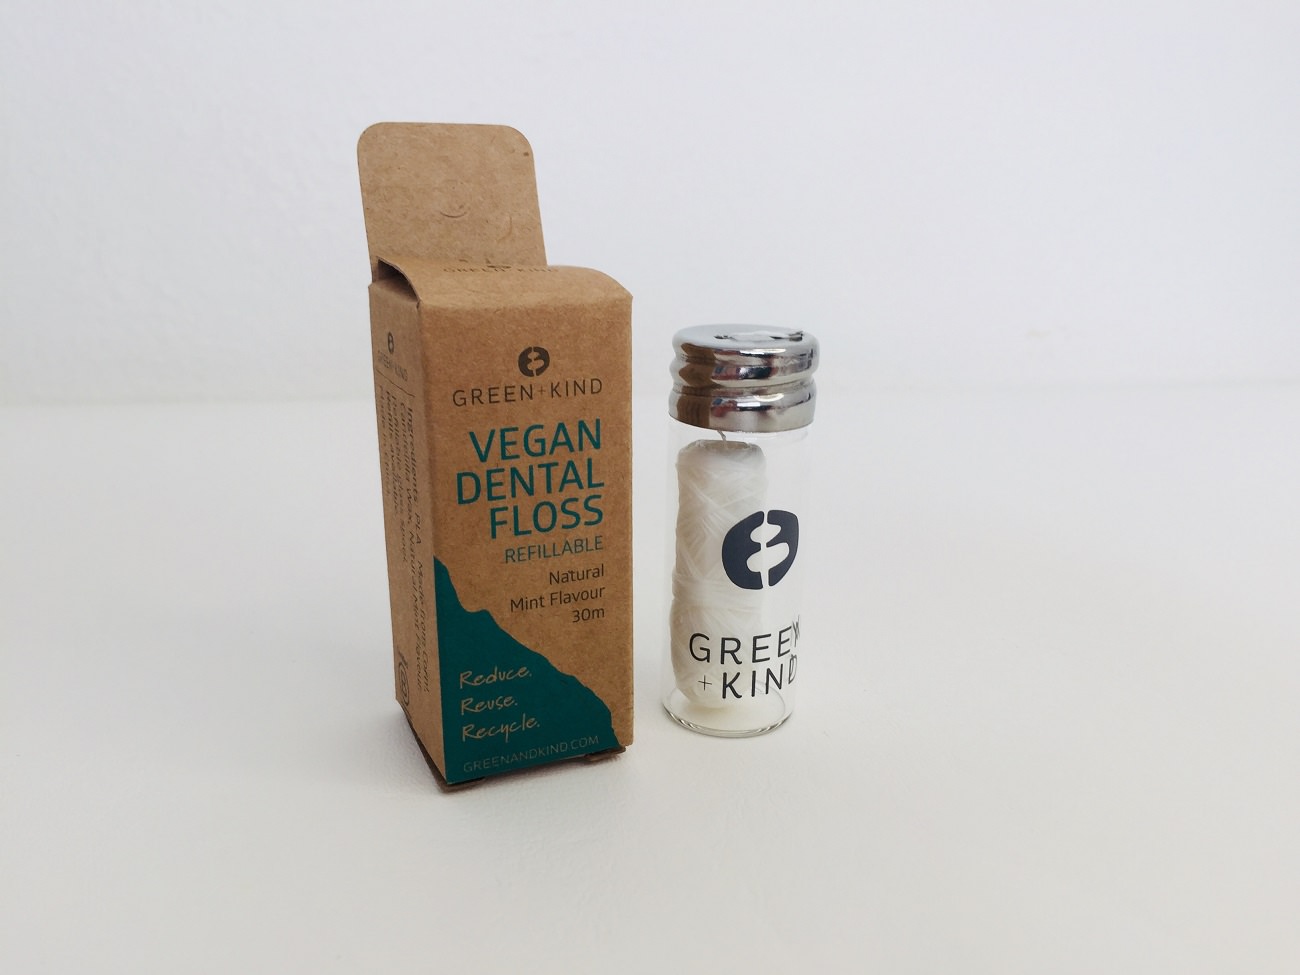 The Green + Kind Vegan Dental Floss and packaging